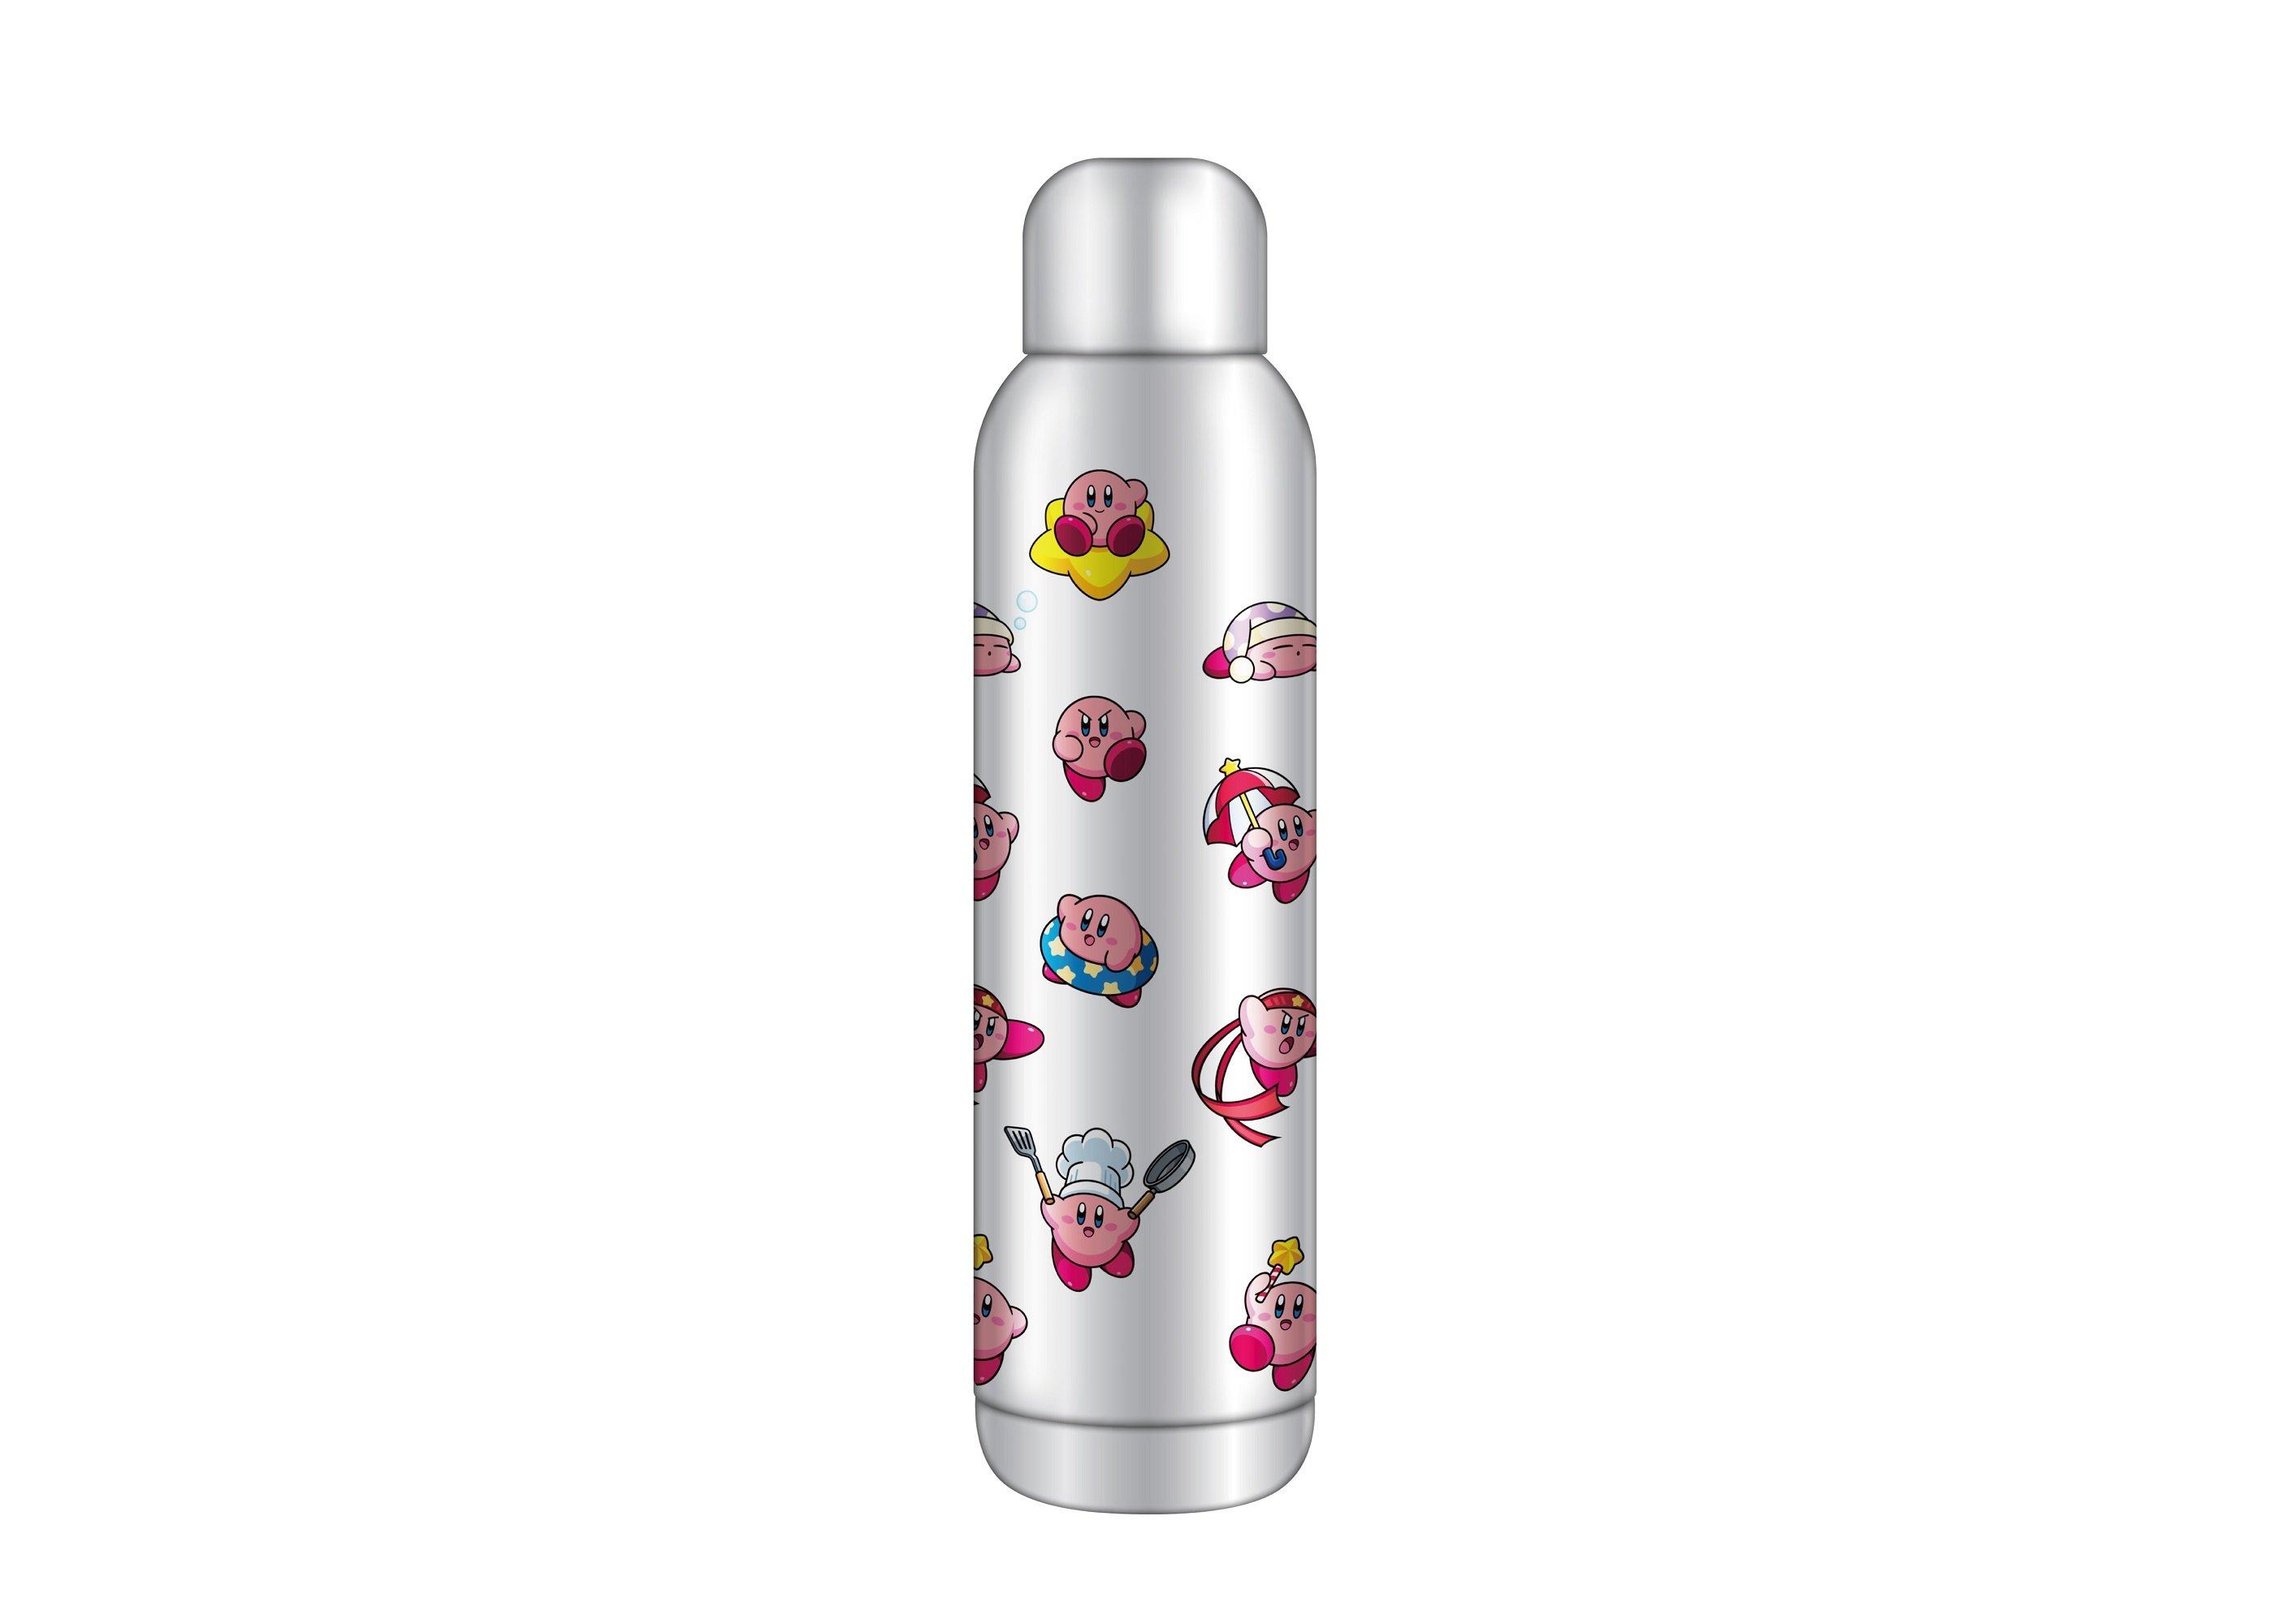 Disney Mickey Mouse Just Girls Stainless Steel Water Bottle